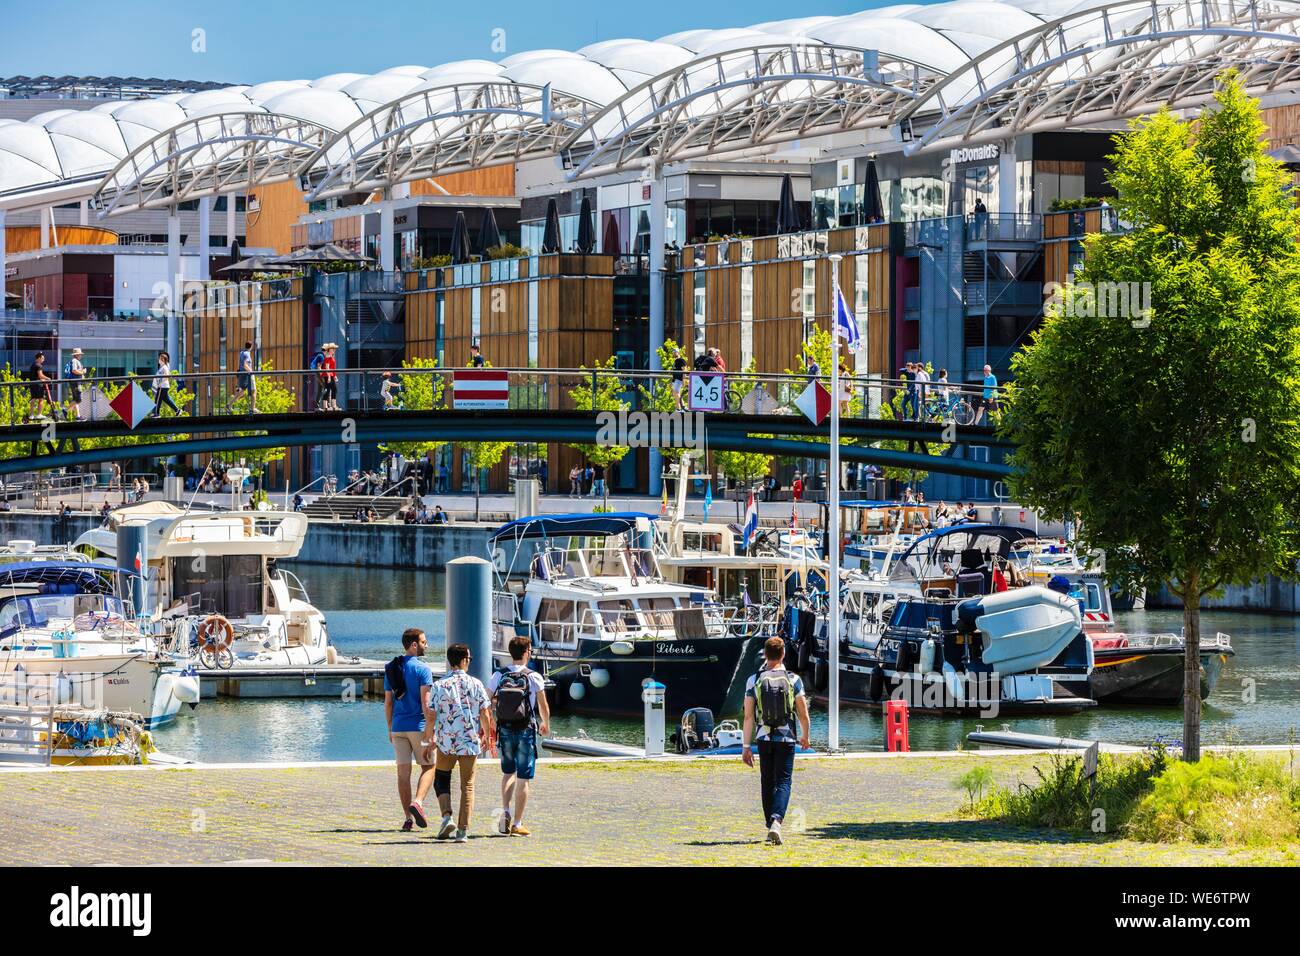 France, Rhone, Lyon, district of La Confluence in the south of the peninsula, first French quarter certified sustainable by the WWF, retail and leisure center Confluence is a shopping center designed by the architect Jean-Paul Viguier inaugurated in 2012 Stock Photo